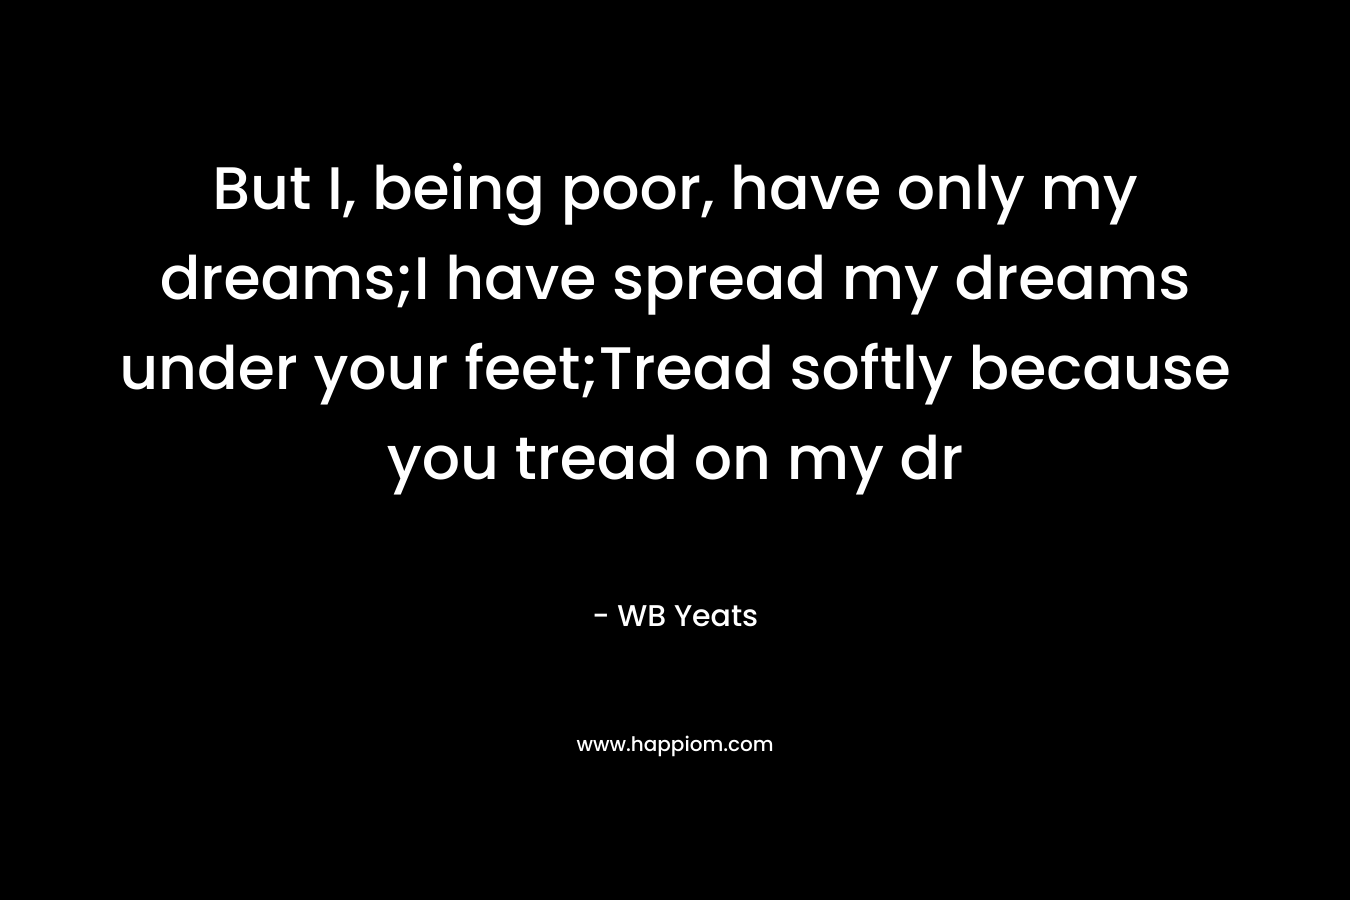 But I, being poor, have only my dreams;I have spread my dreams under your feet;Tread softly because you tread on my dr – WB Yeats